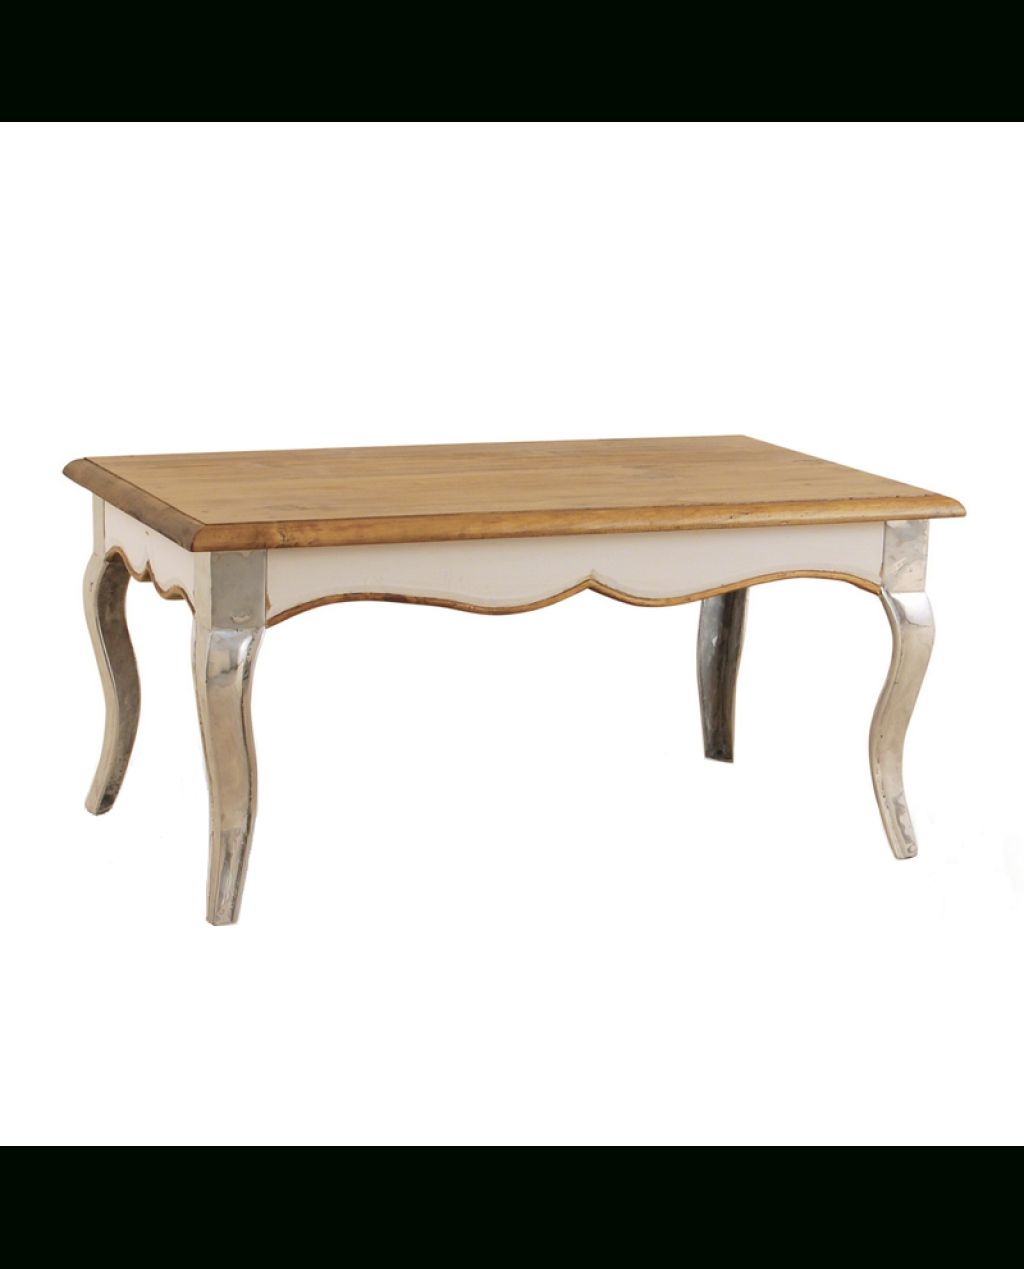 French Style Coffee Table Furniture Hire Pertaining To French Style Coffee Tables (View 6 of 30)